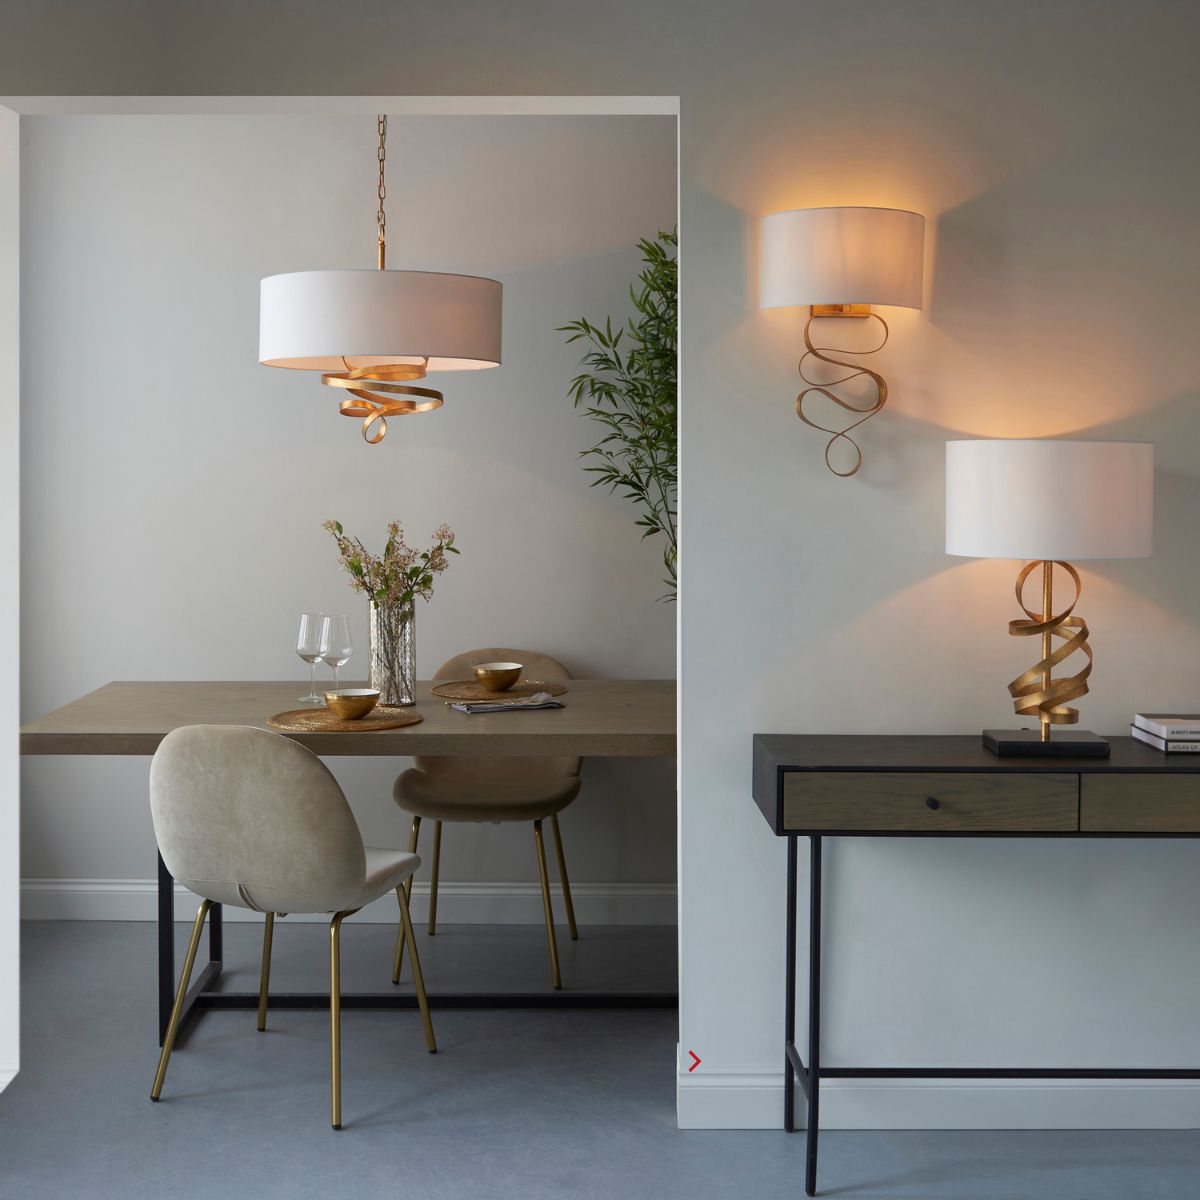 4 Do’s And Dont's For Mixing And Matching Lighting Fixtures